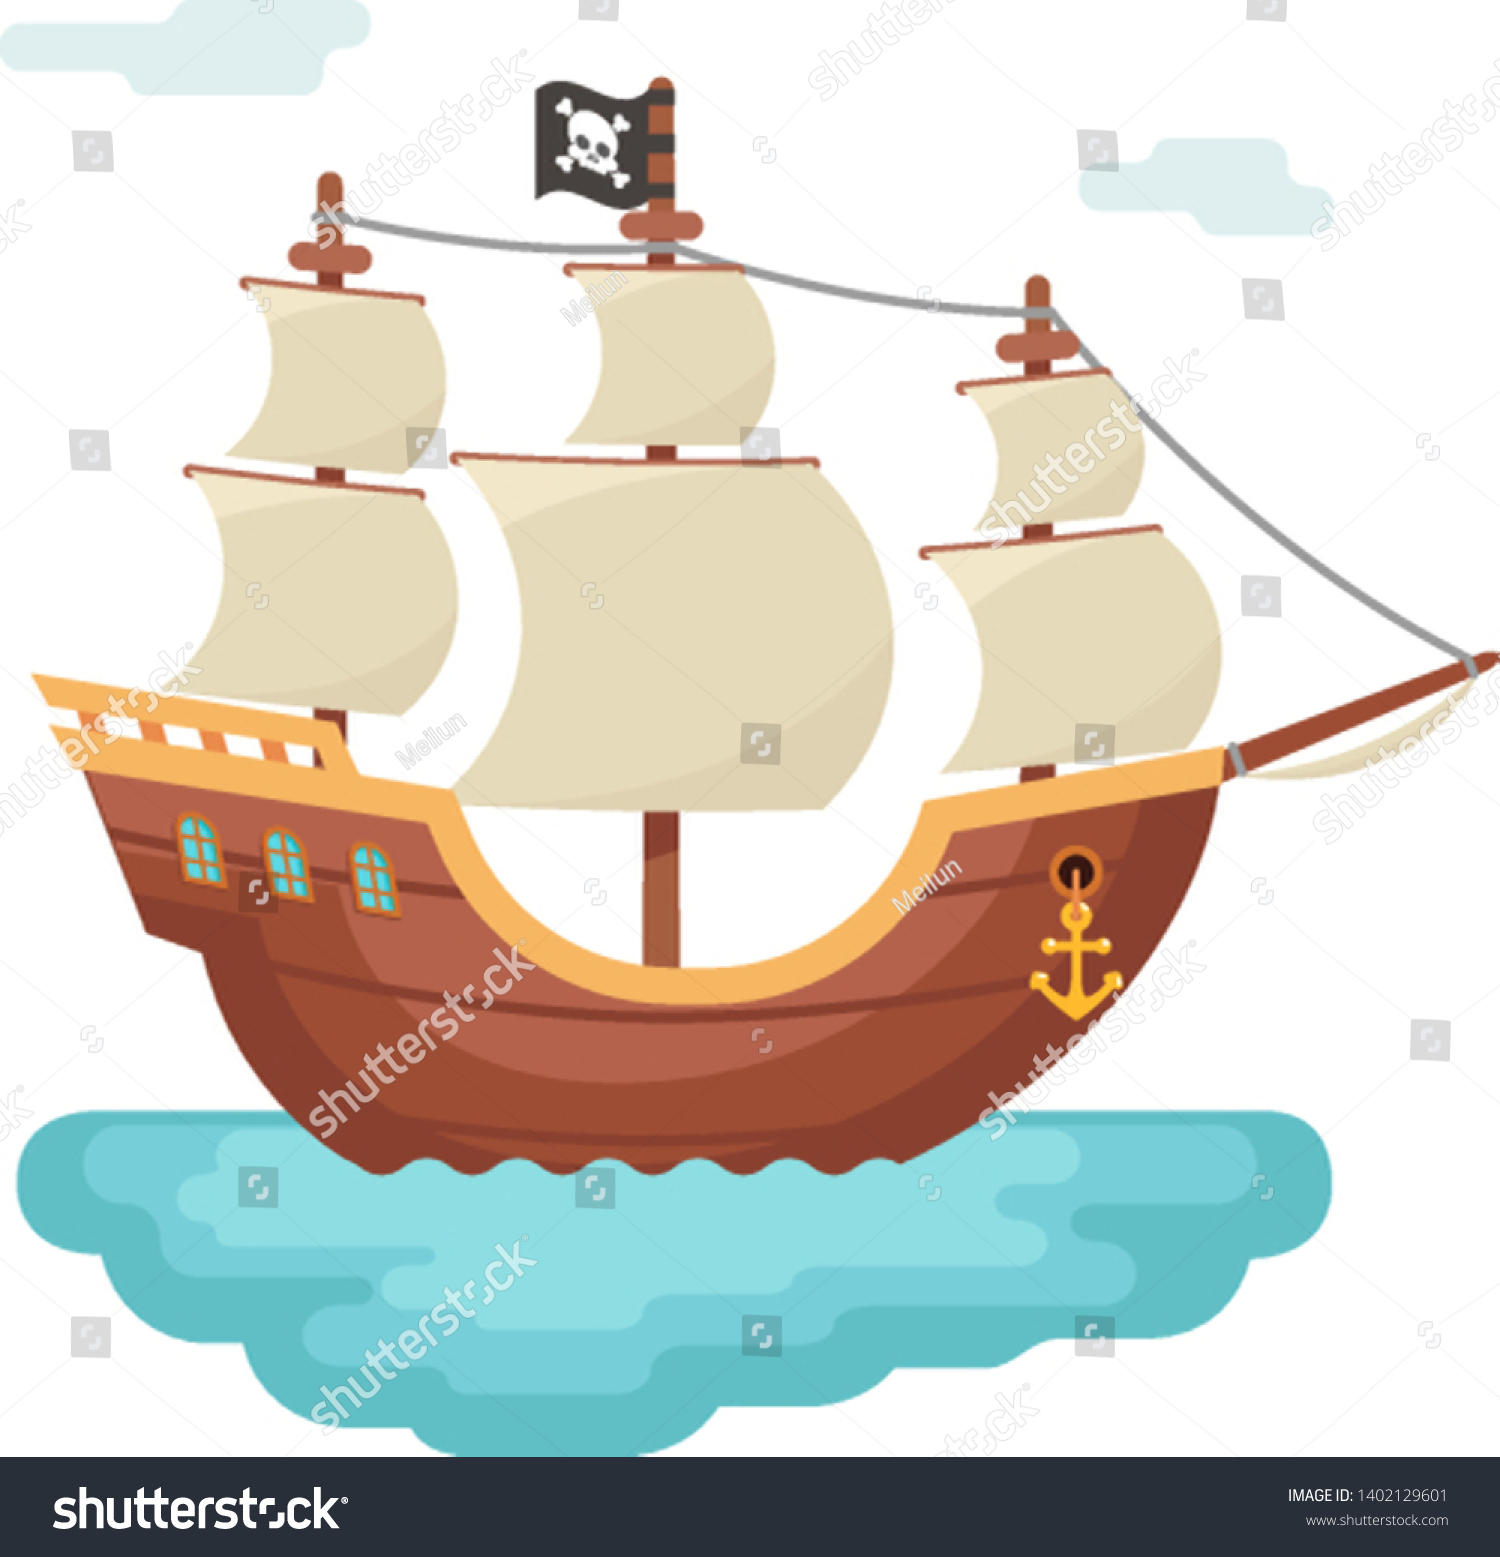 SVG of Wooden boat pirate buccaneer sailing filibuster bounty corsair journey sea dog ship game isolated icon cartoon flat design vector illustration svg